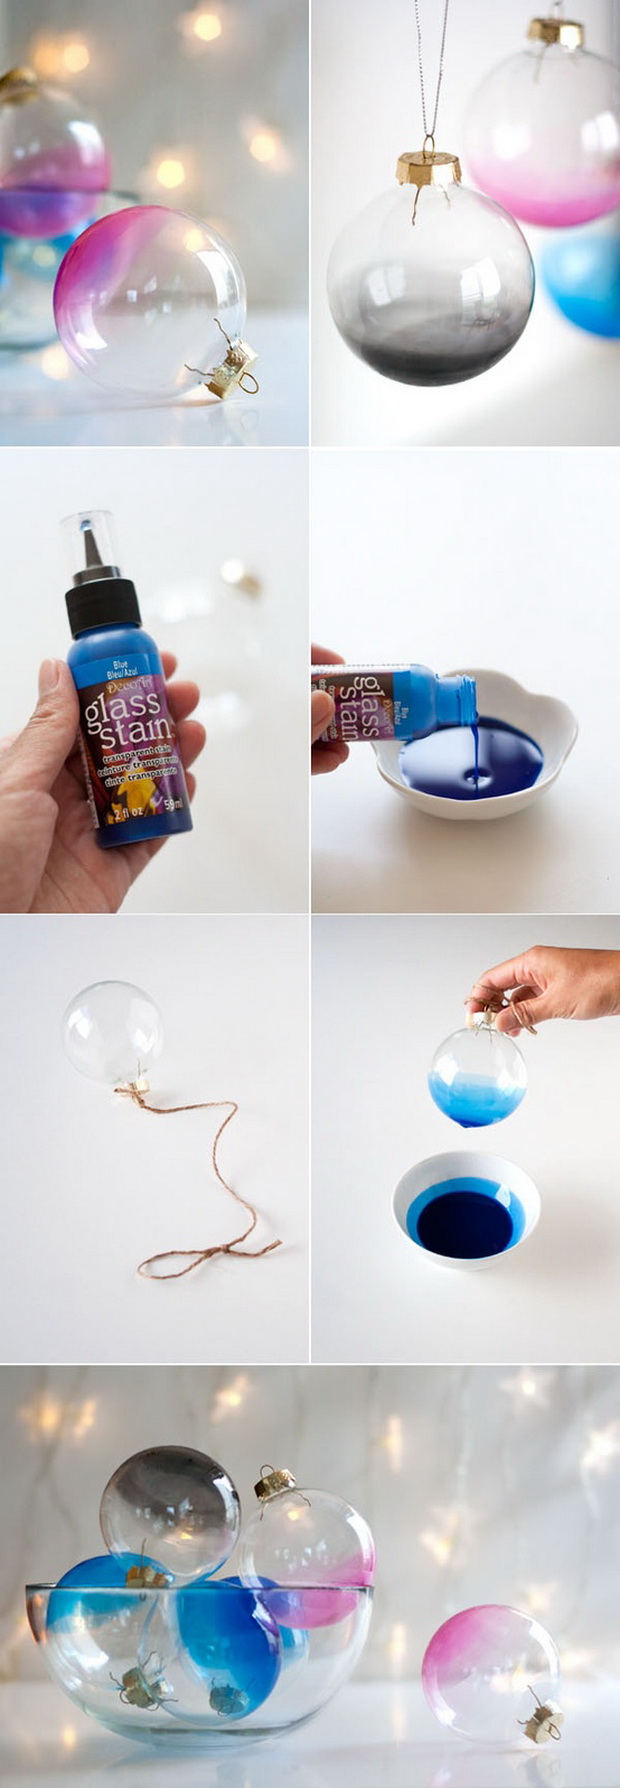 23 DIY Simple and Practical Ideas